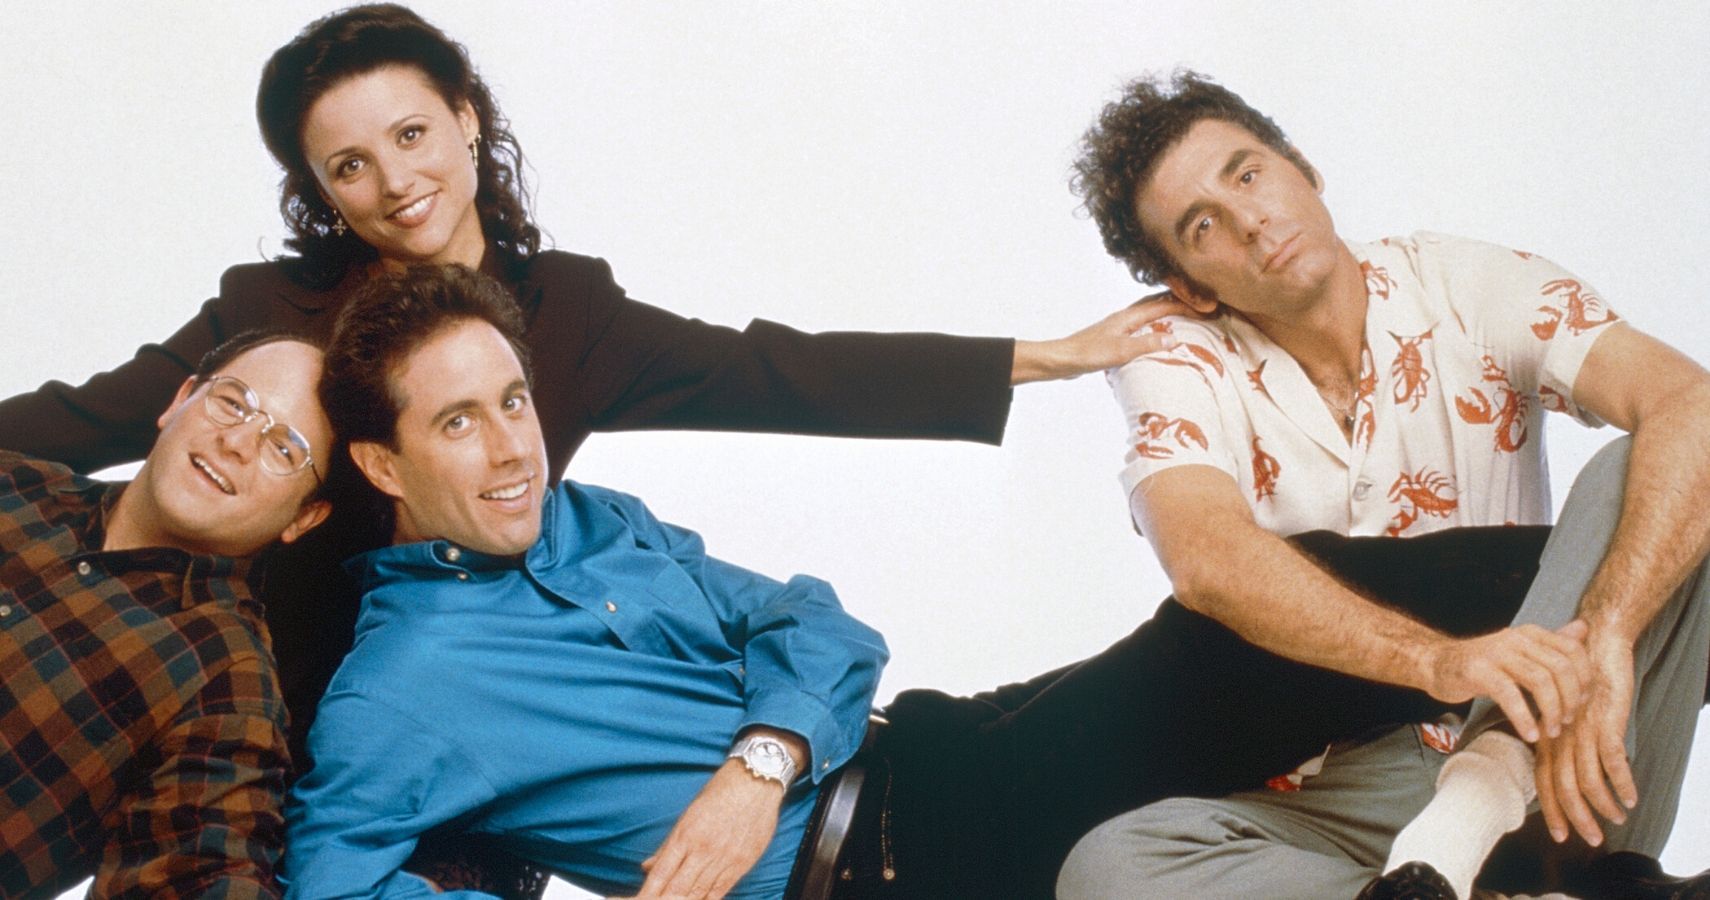 Seinfeld 5 Of Jerrys Girlfriends Wed Love To Date (and 5 We Wouldnt) photo photo